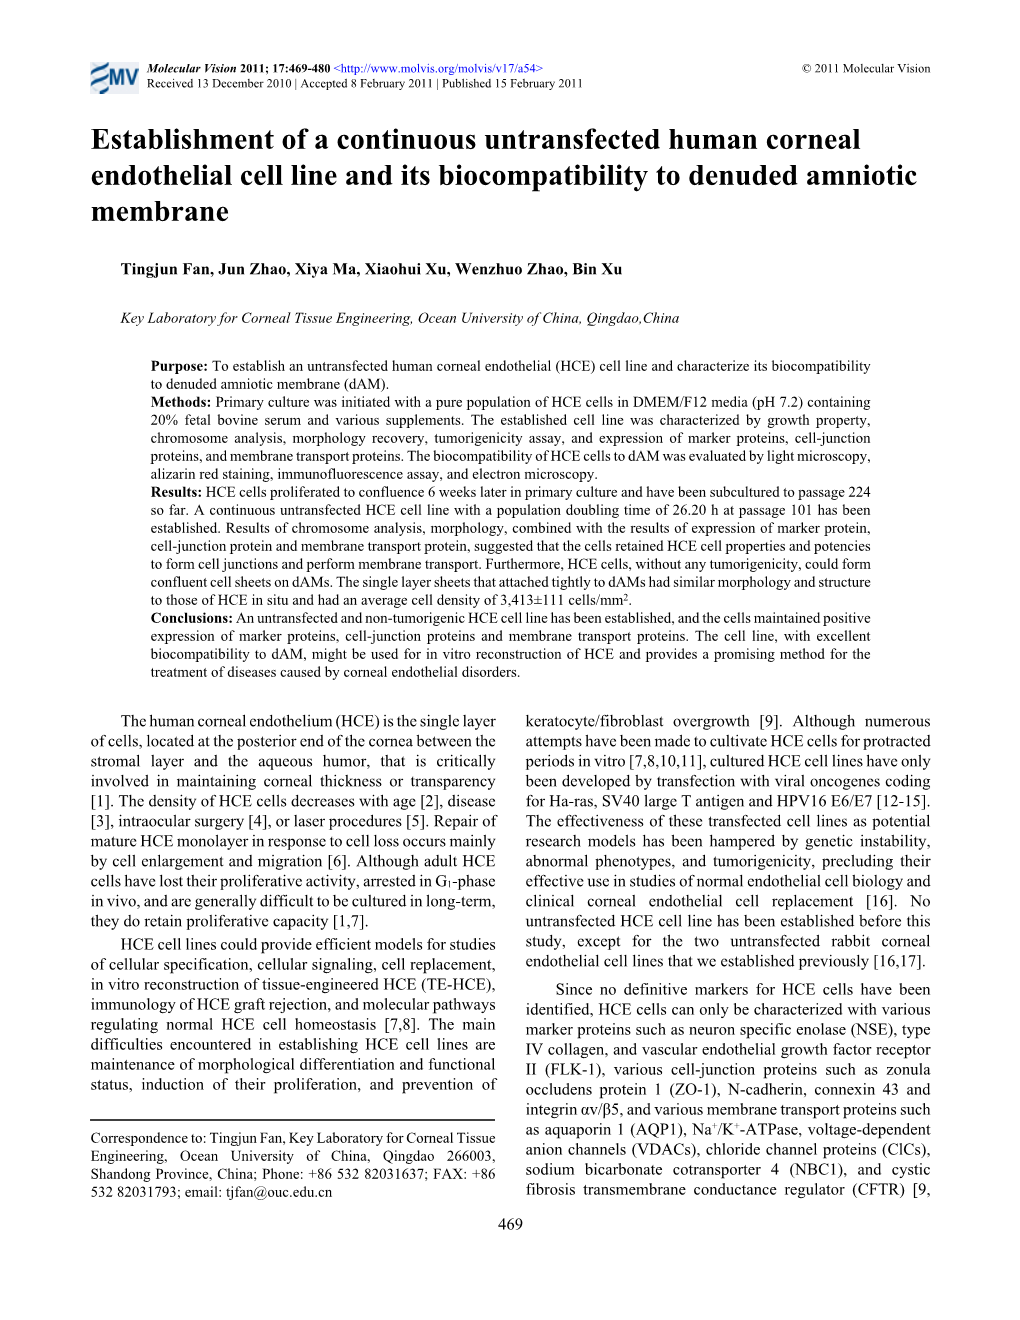 Establishment of a Continuous Untransfected Human Corneal Endothelial Cell Line and Its Biocompatibility to Denuded Amniotic Membrane